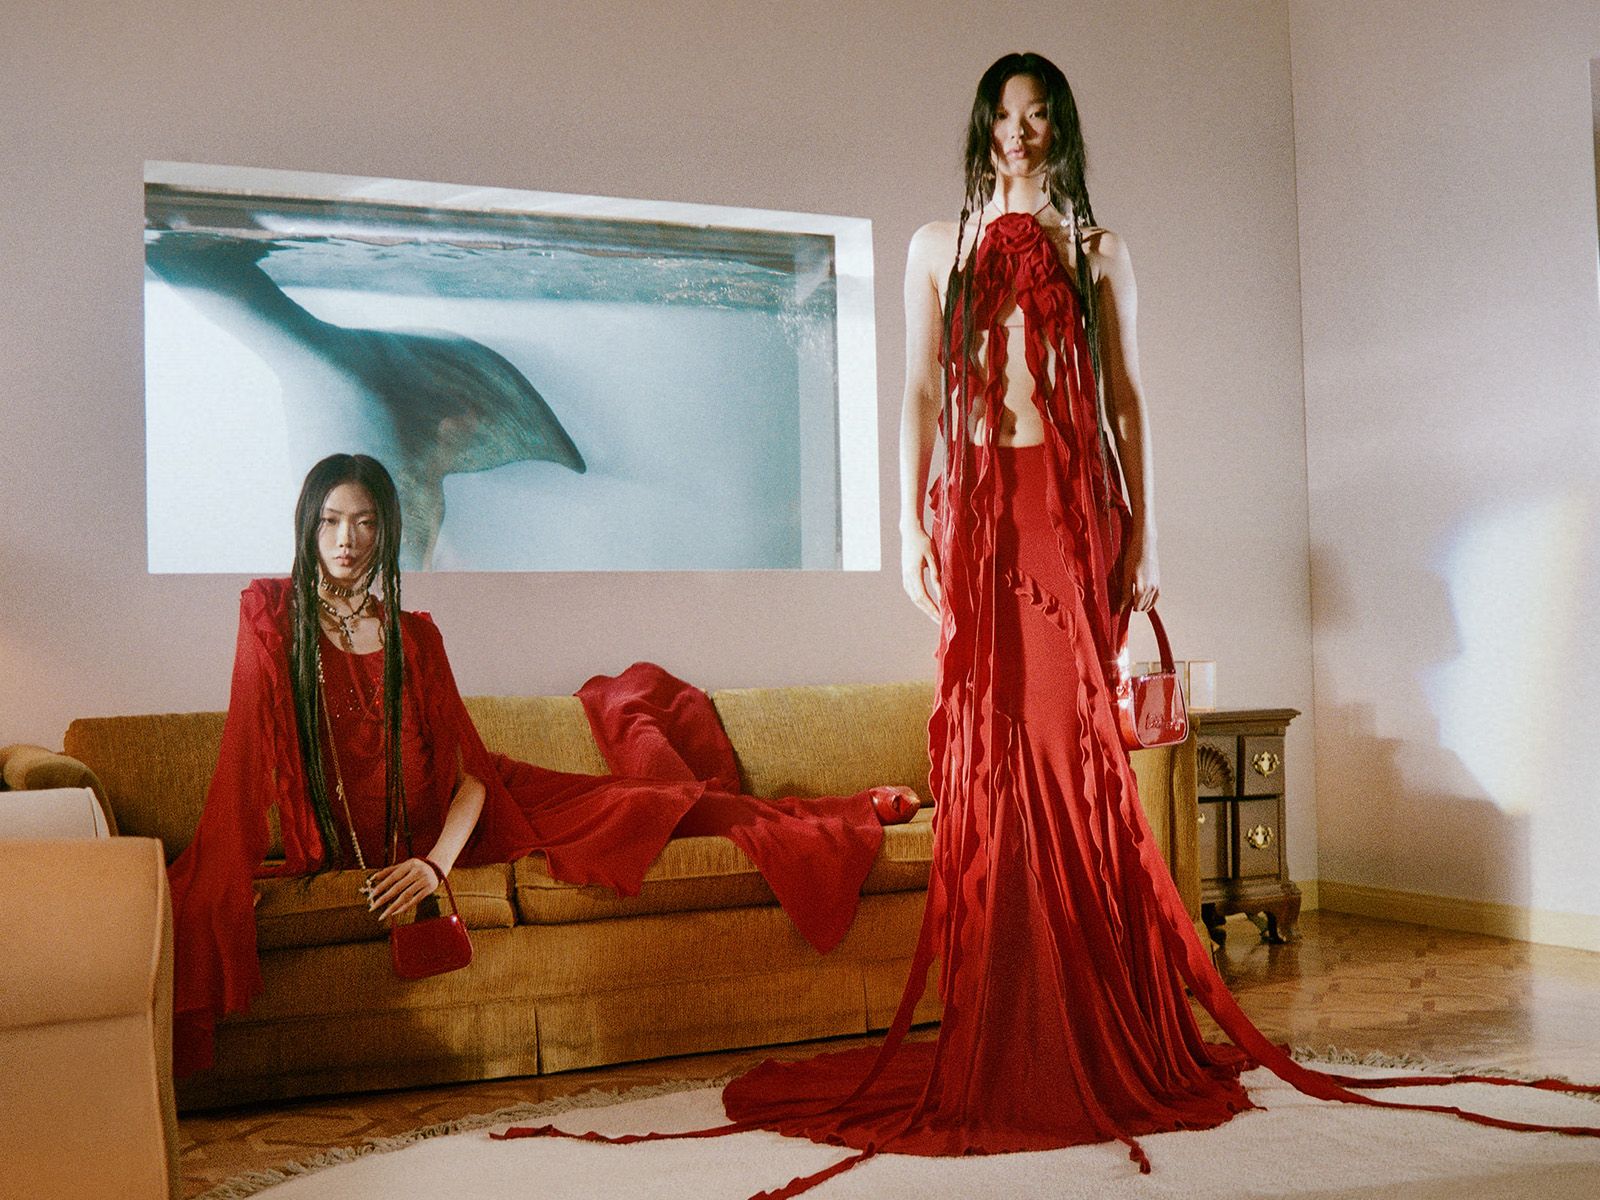 Blumarine returns with another campaign as dreamlike as it is real